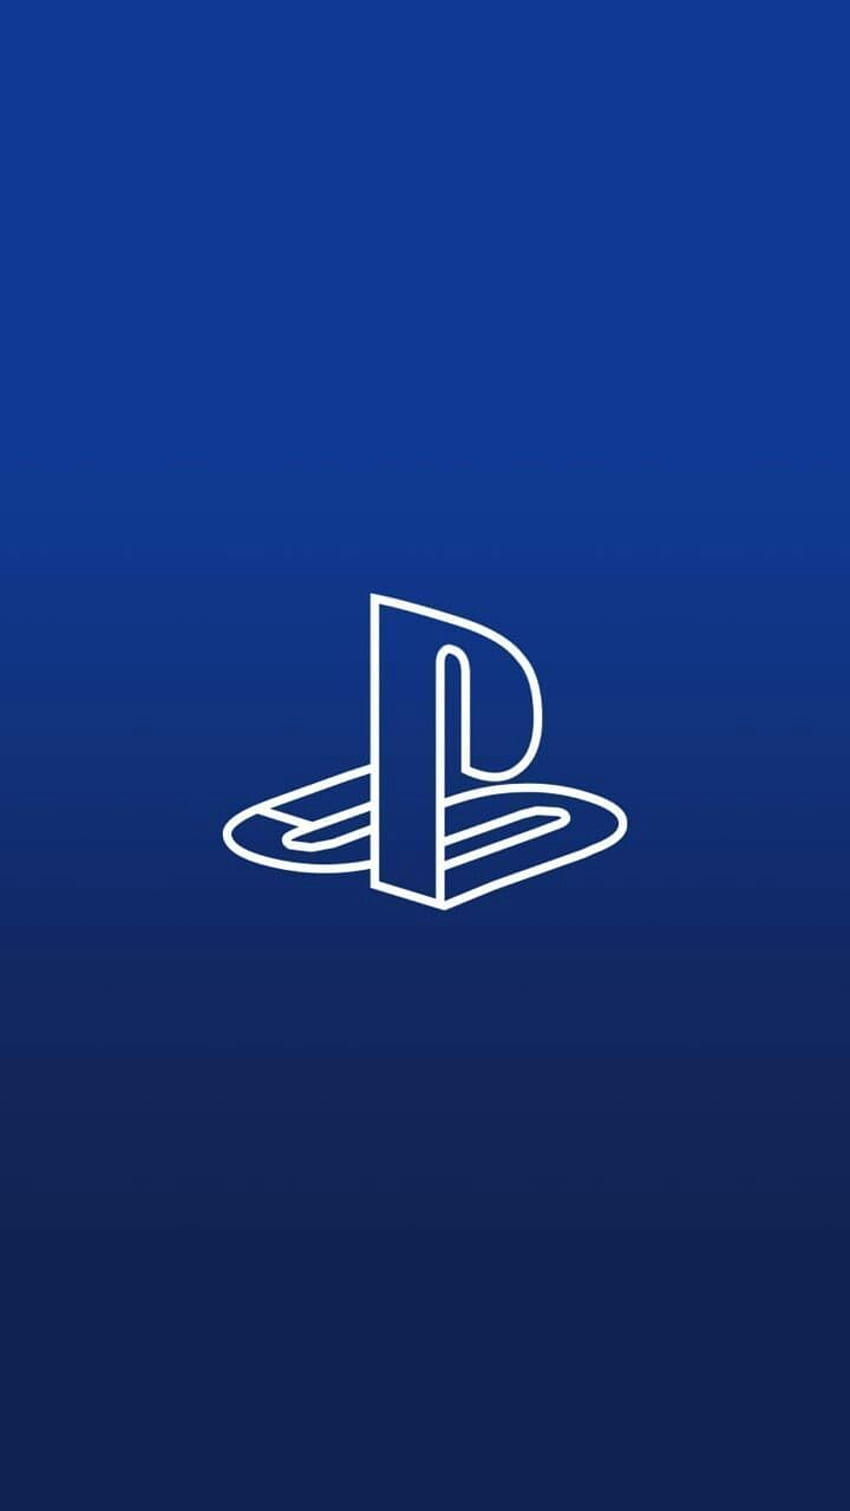 Playstation ”. Game iphone, Playstation logo, Game background, PlayStation Blue HD phone wallpaper